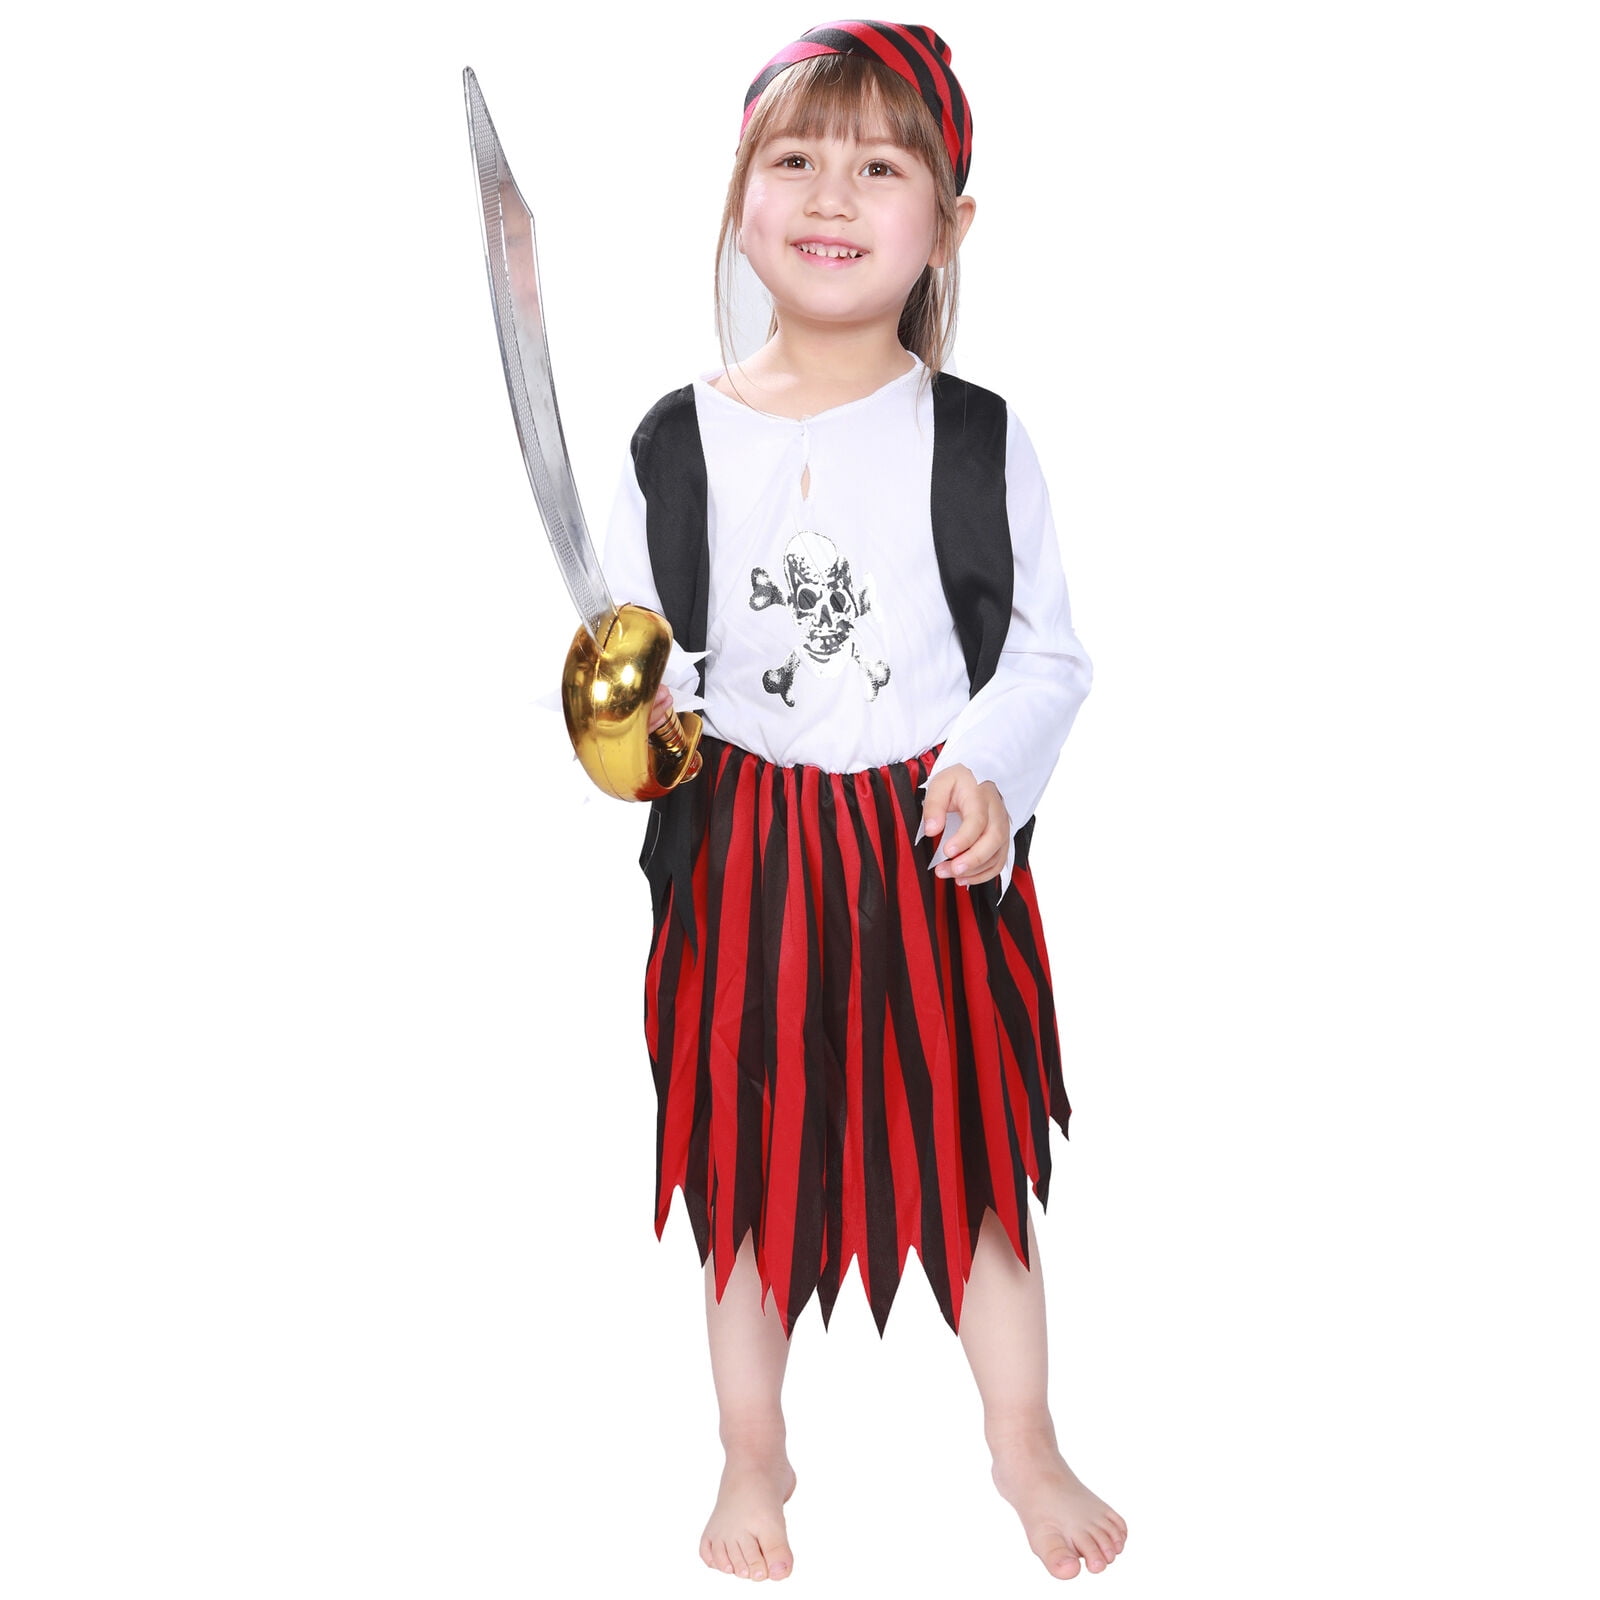 Pirate Captain Girls Fancy Dress Caribbean Buccaneer Childs Kids Costume Outfit 